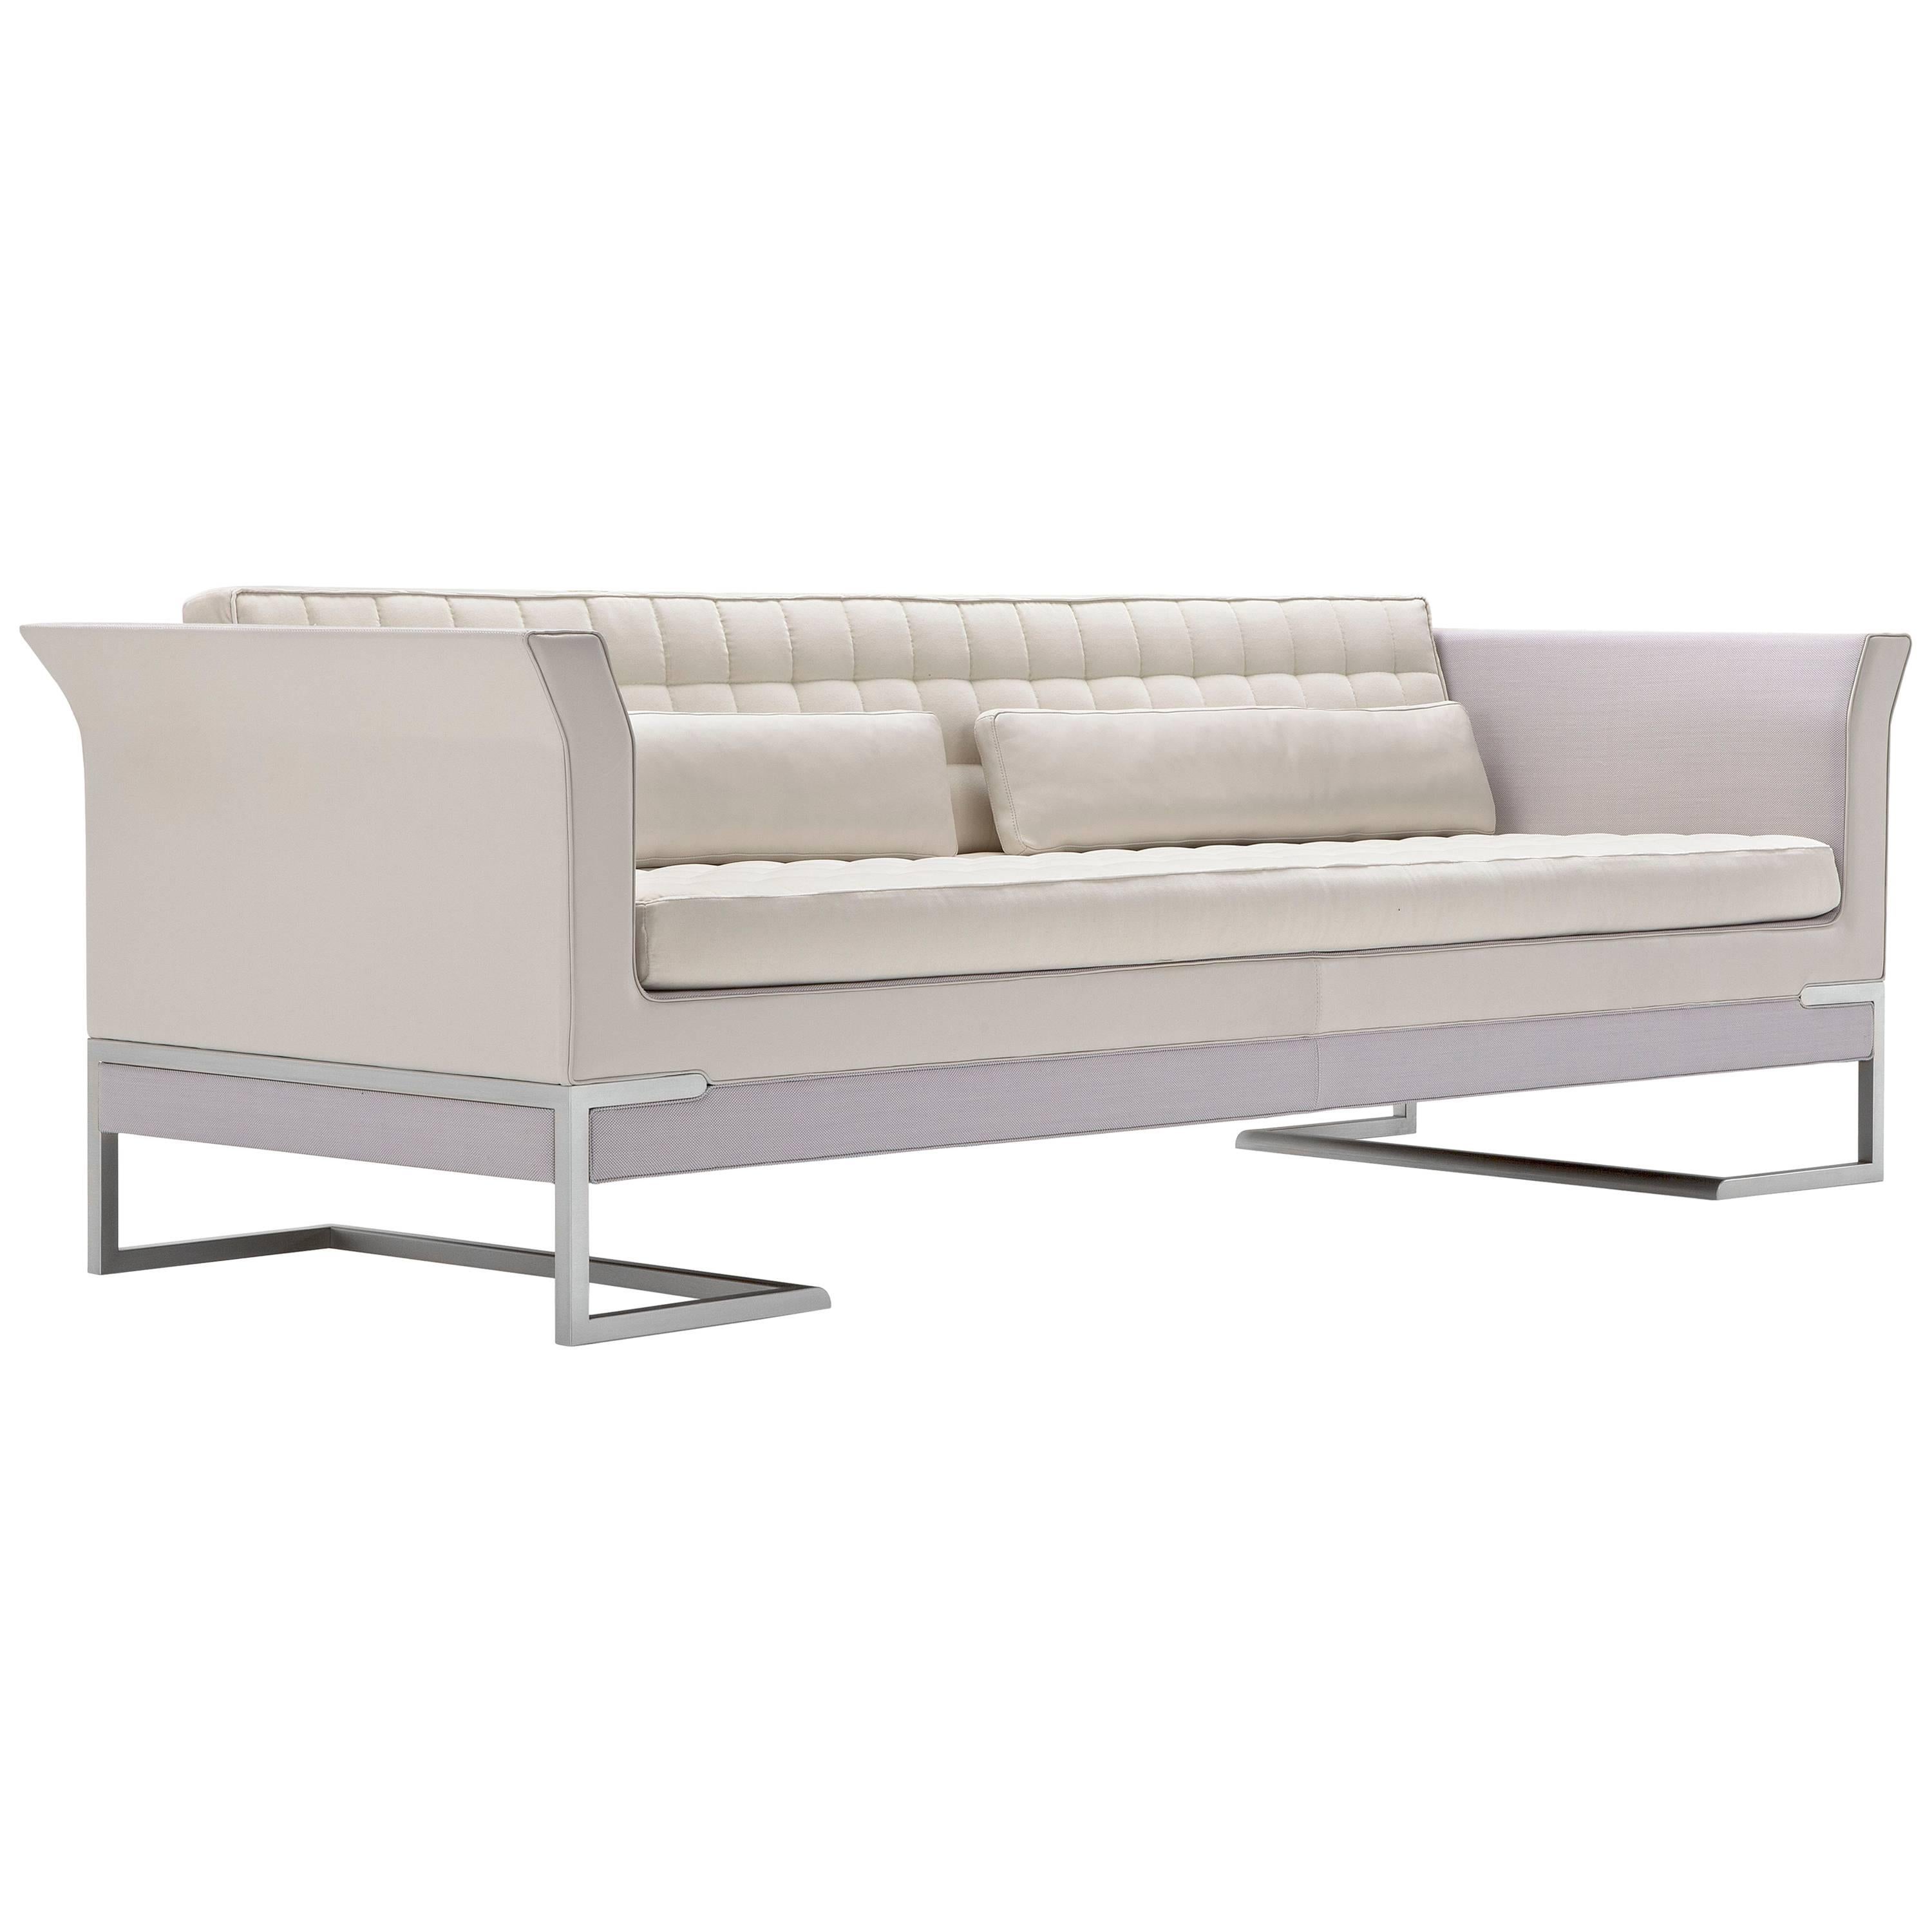 Tiffany Sofa in Ivory by Luca Scacchetti For Sale